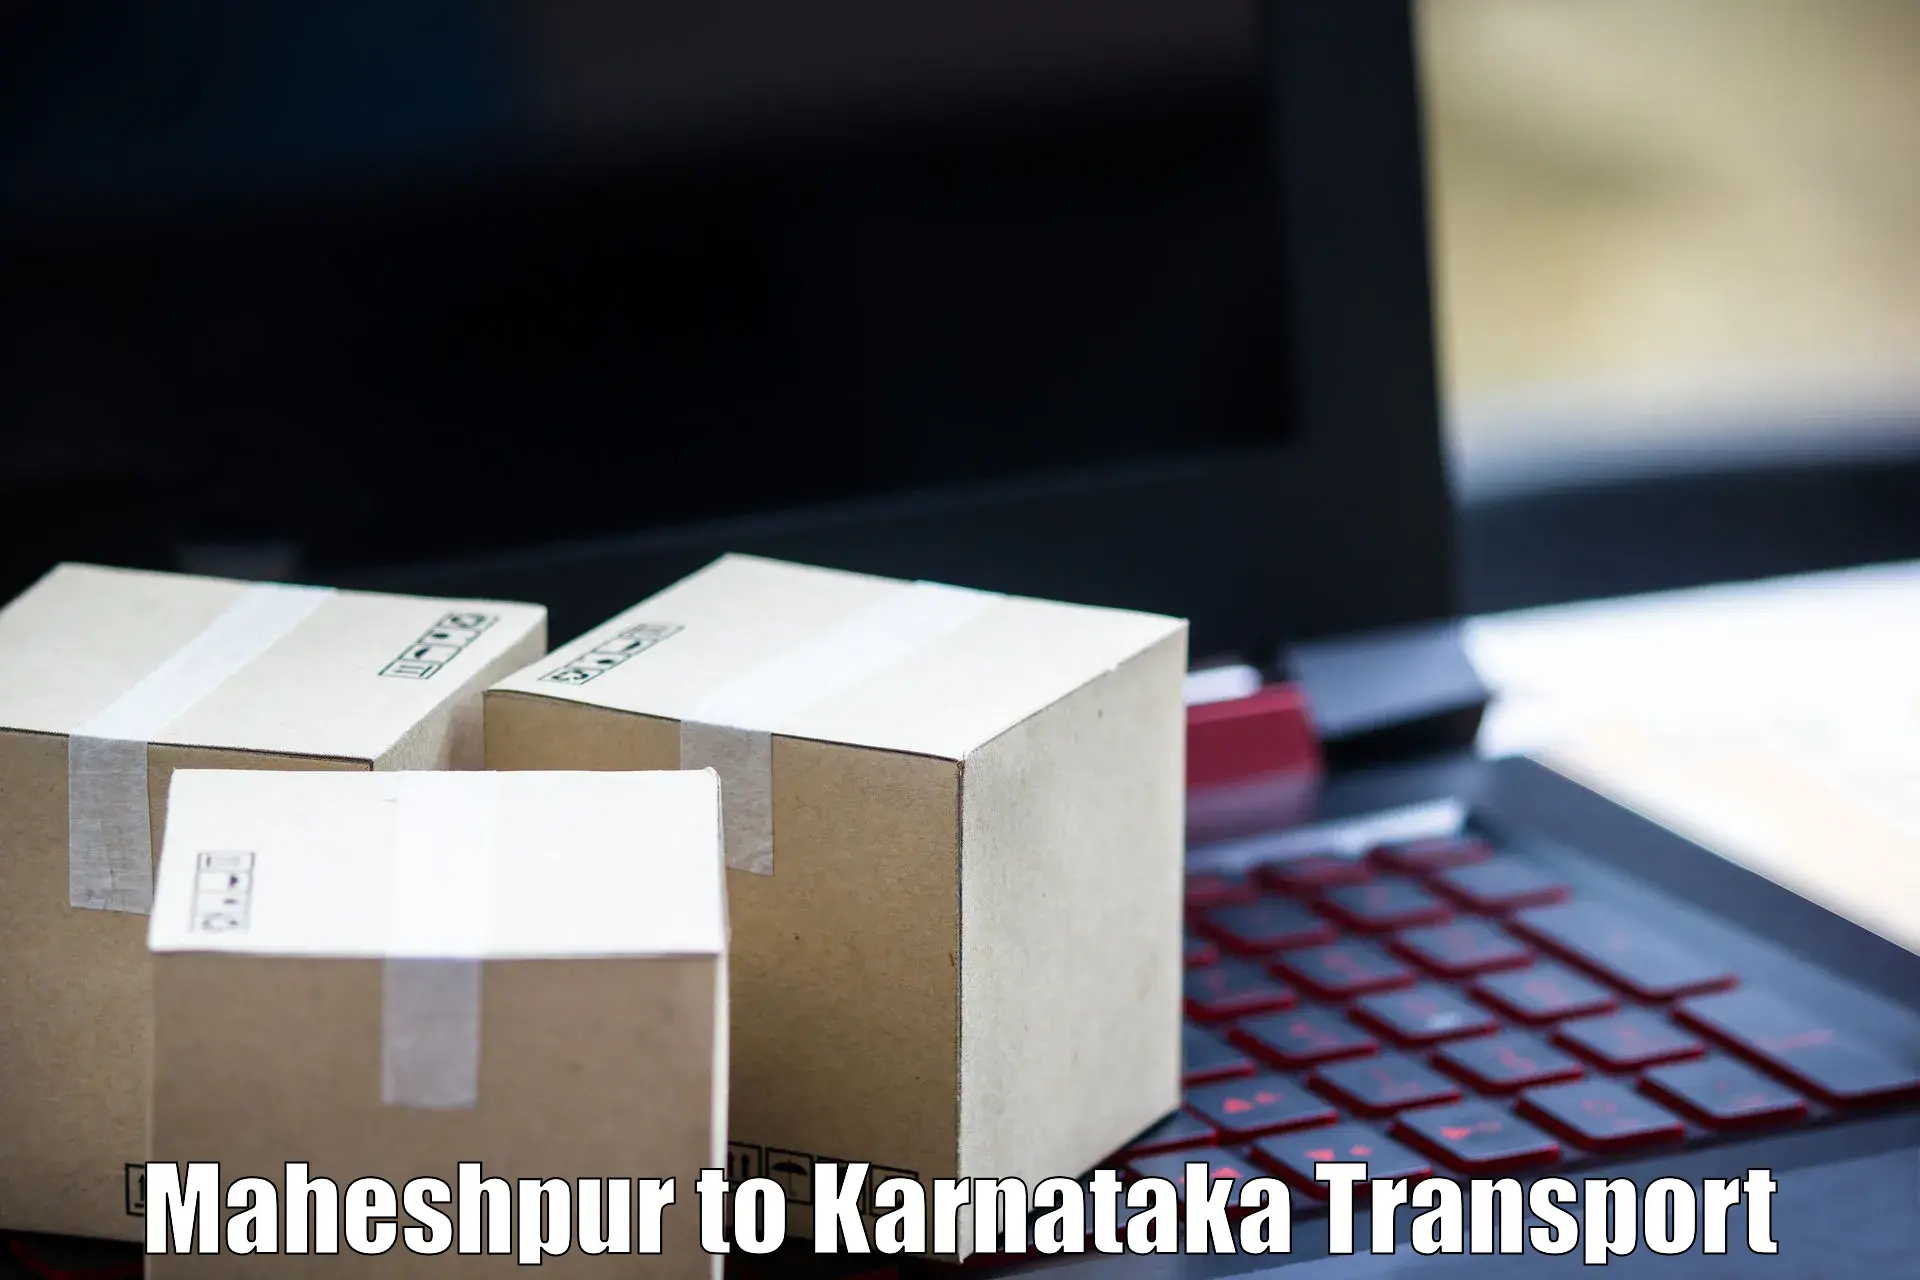 Package delivery services Maheshpur to Yelburga